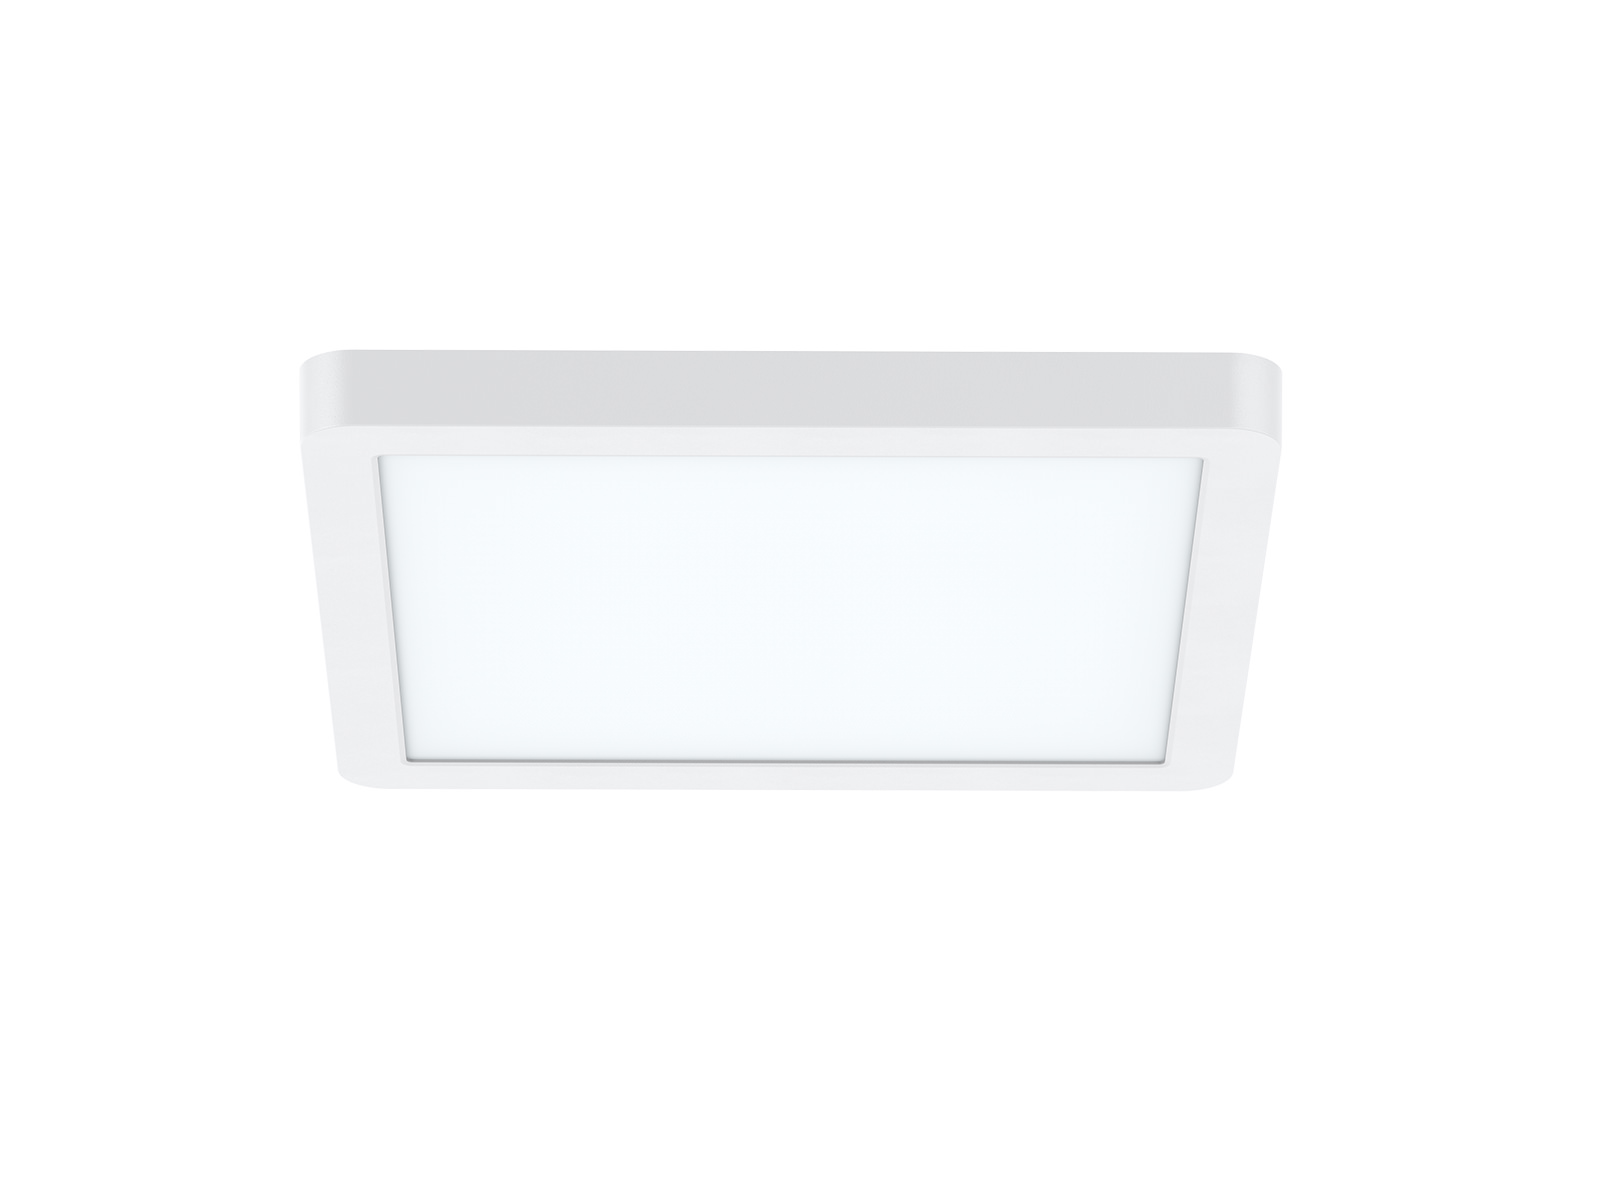 DL280C DownLight With Adjustable Cutout Size